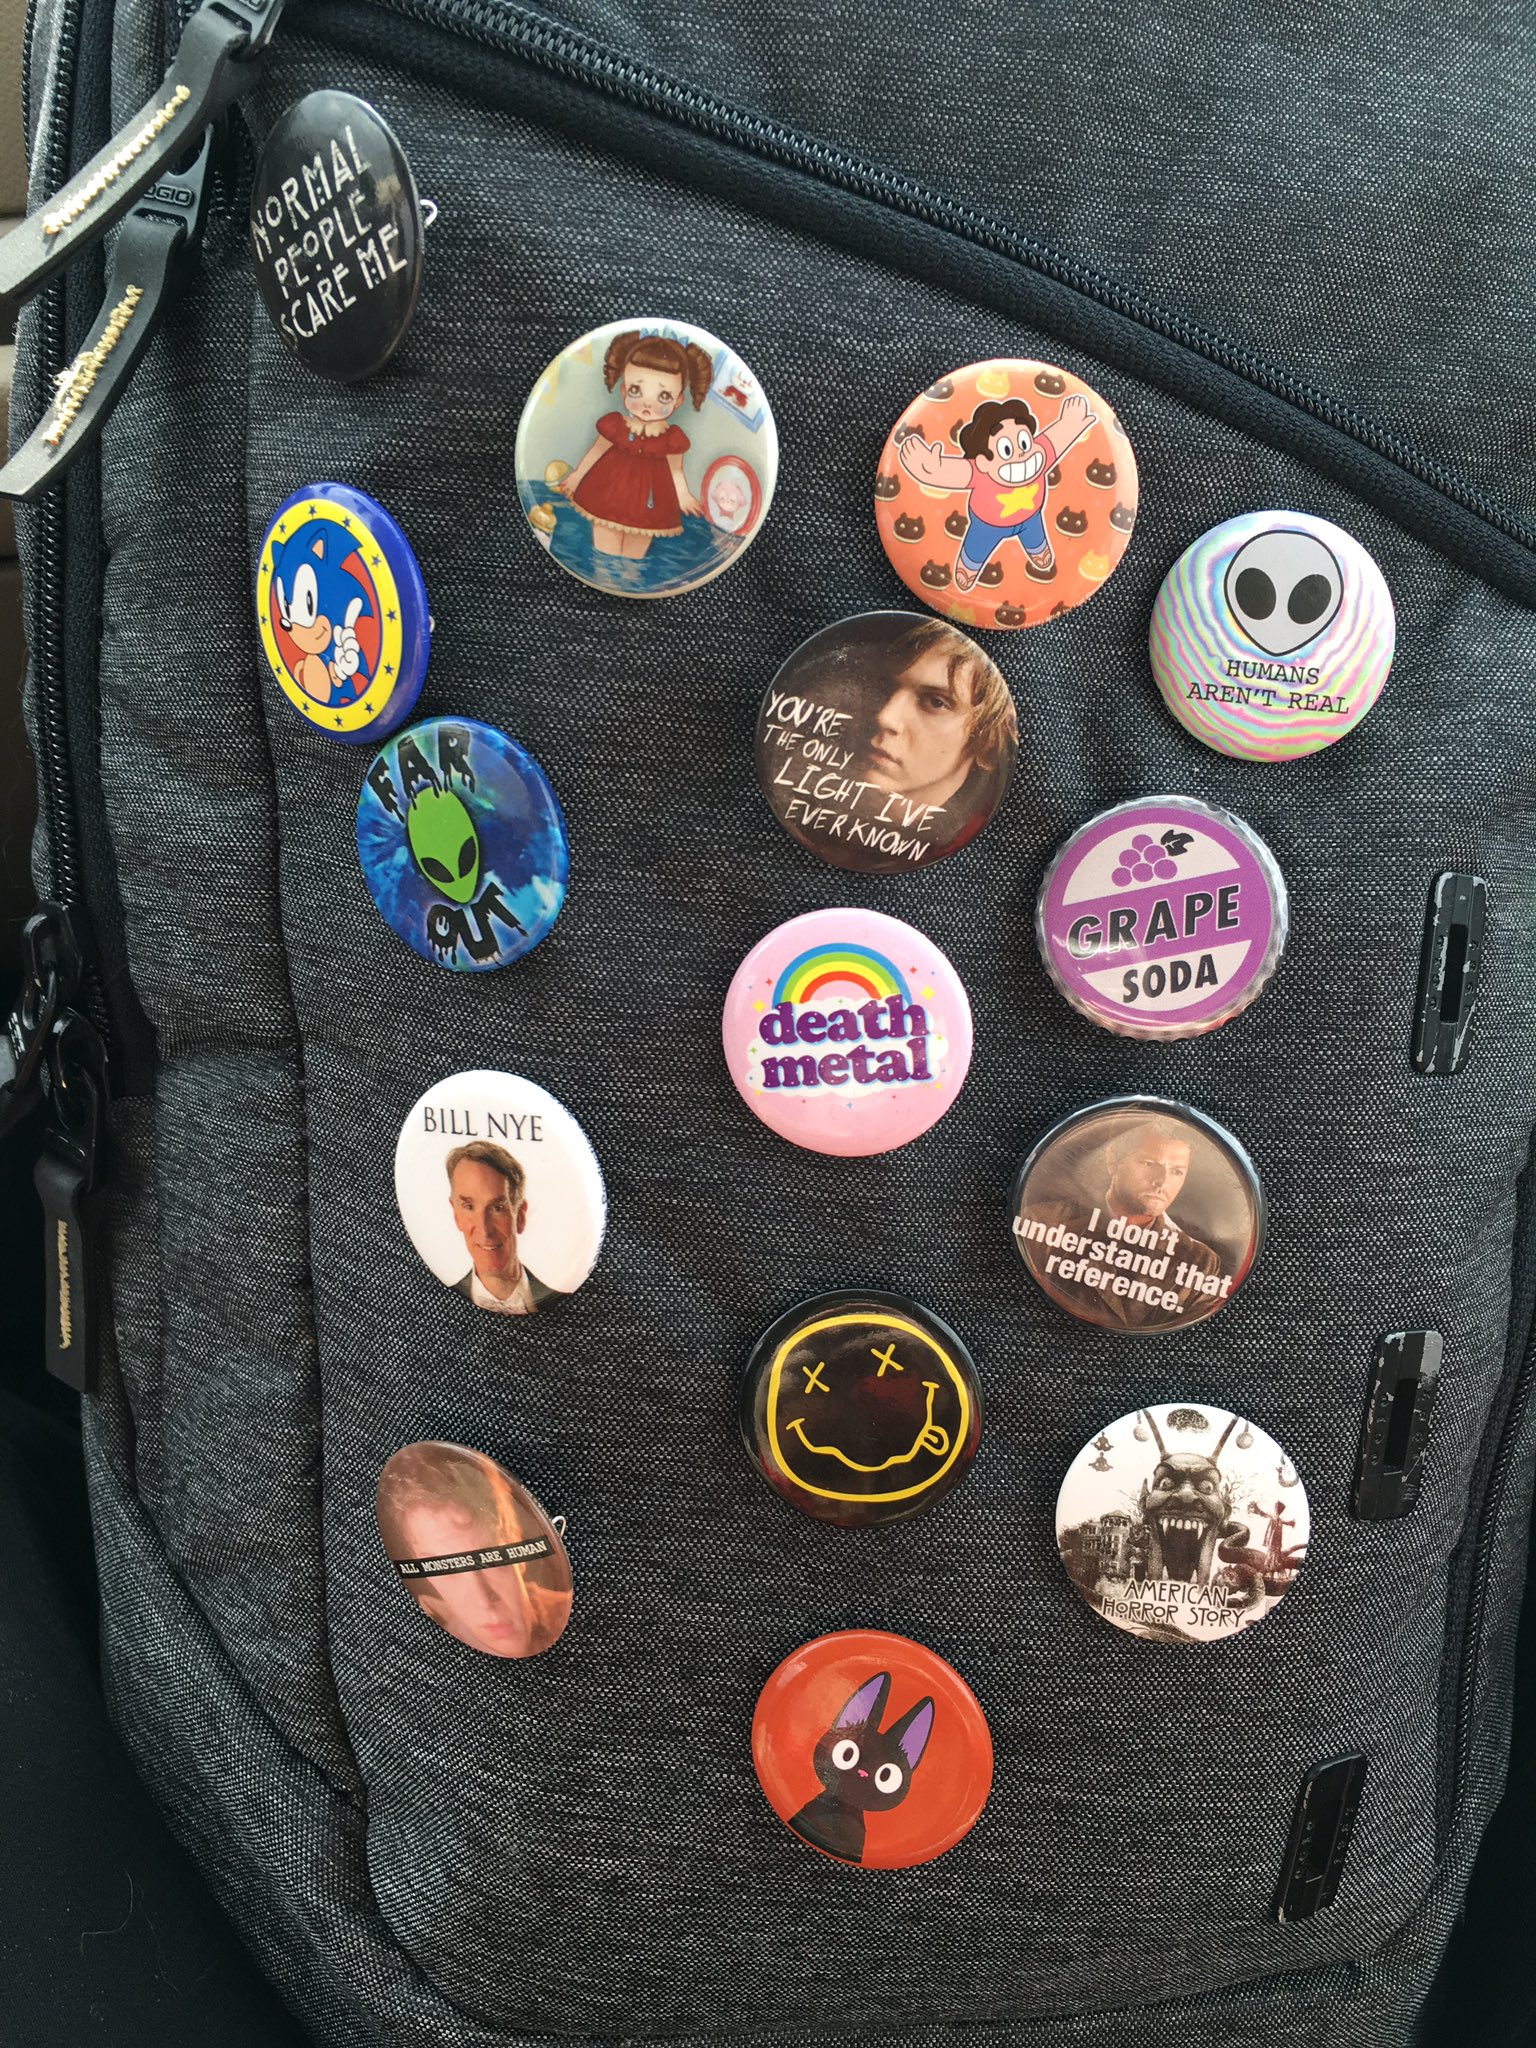 Hot Topic on X: RT @beaniestealer: 15 @HotTopic pins on my